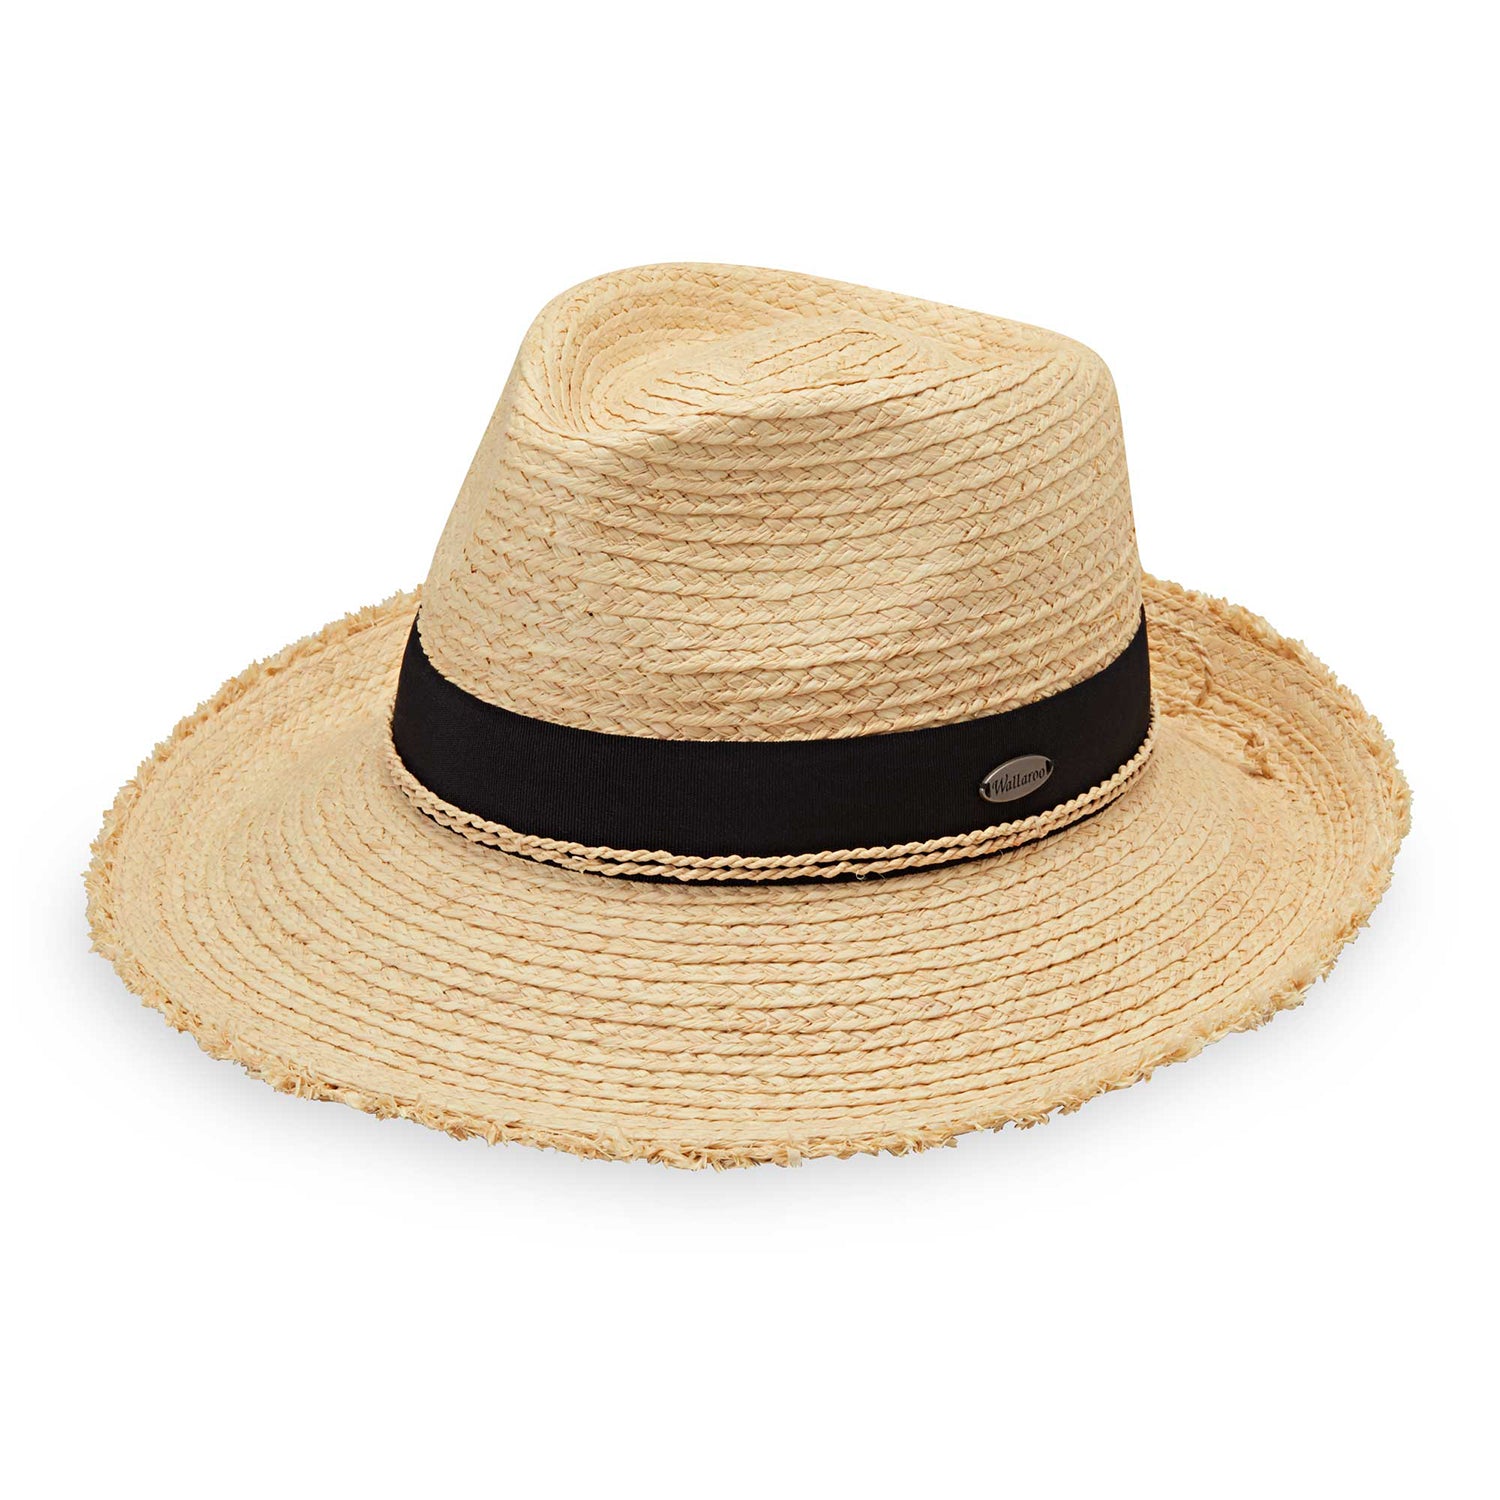 Featuring Natural fiber-made Paloma sun hat by Wallaroo, featuring a UPF 50+ rating and  frayed brim